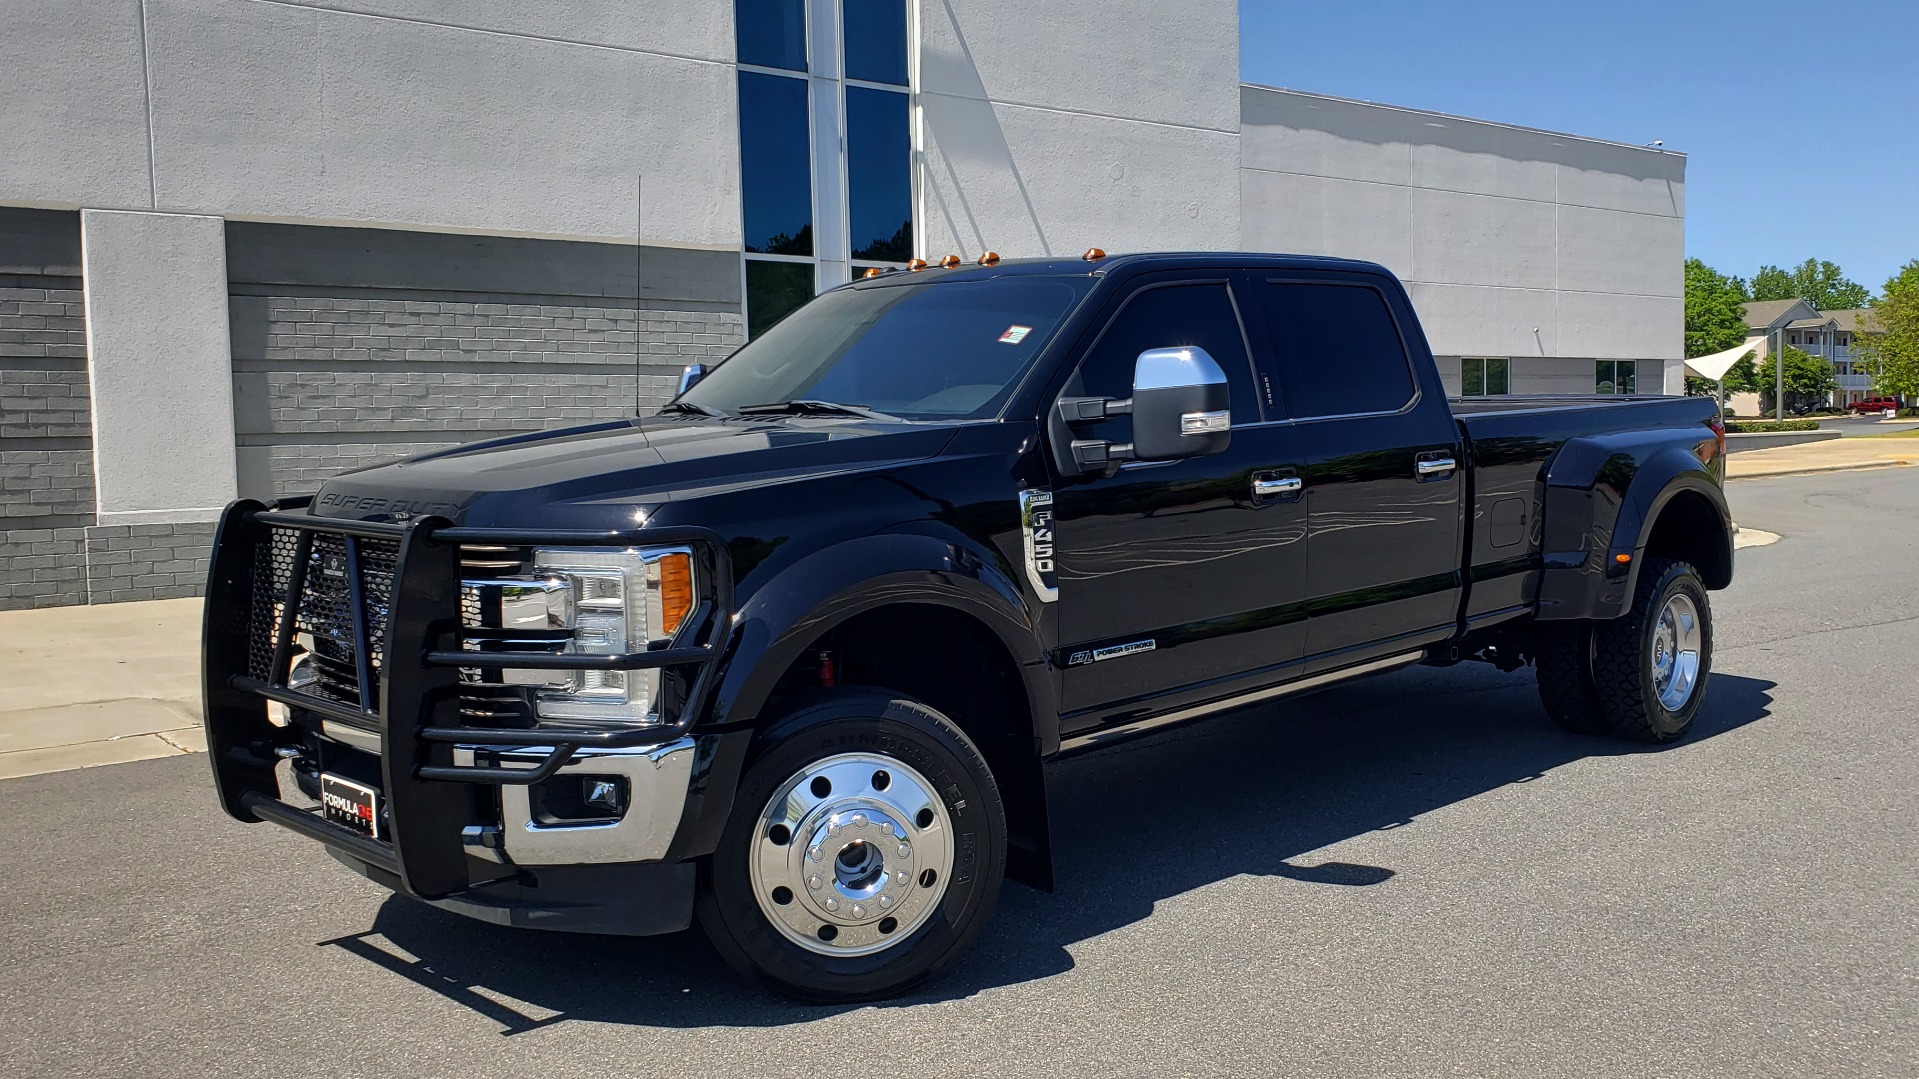 Used 2017 Ford SUPER DUTY F-450 DRW KING RANCH 4X4 / 176IN WB / 6.7L POWER-STROKE / LOADED for sale Sold at Formula Imports in Charlotte NC 28227 1